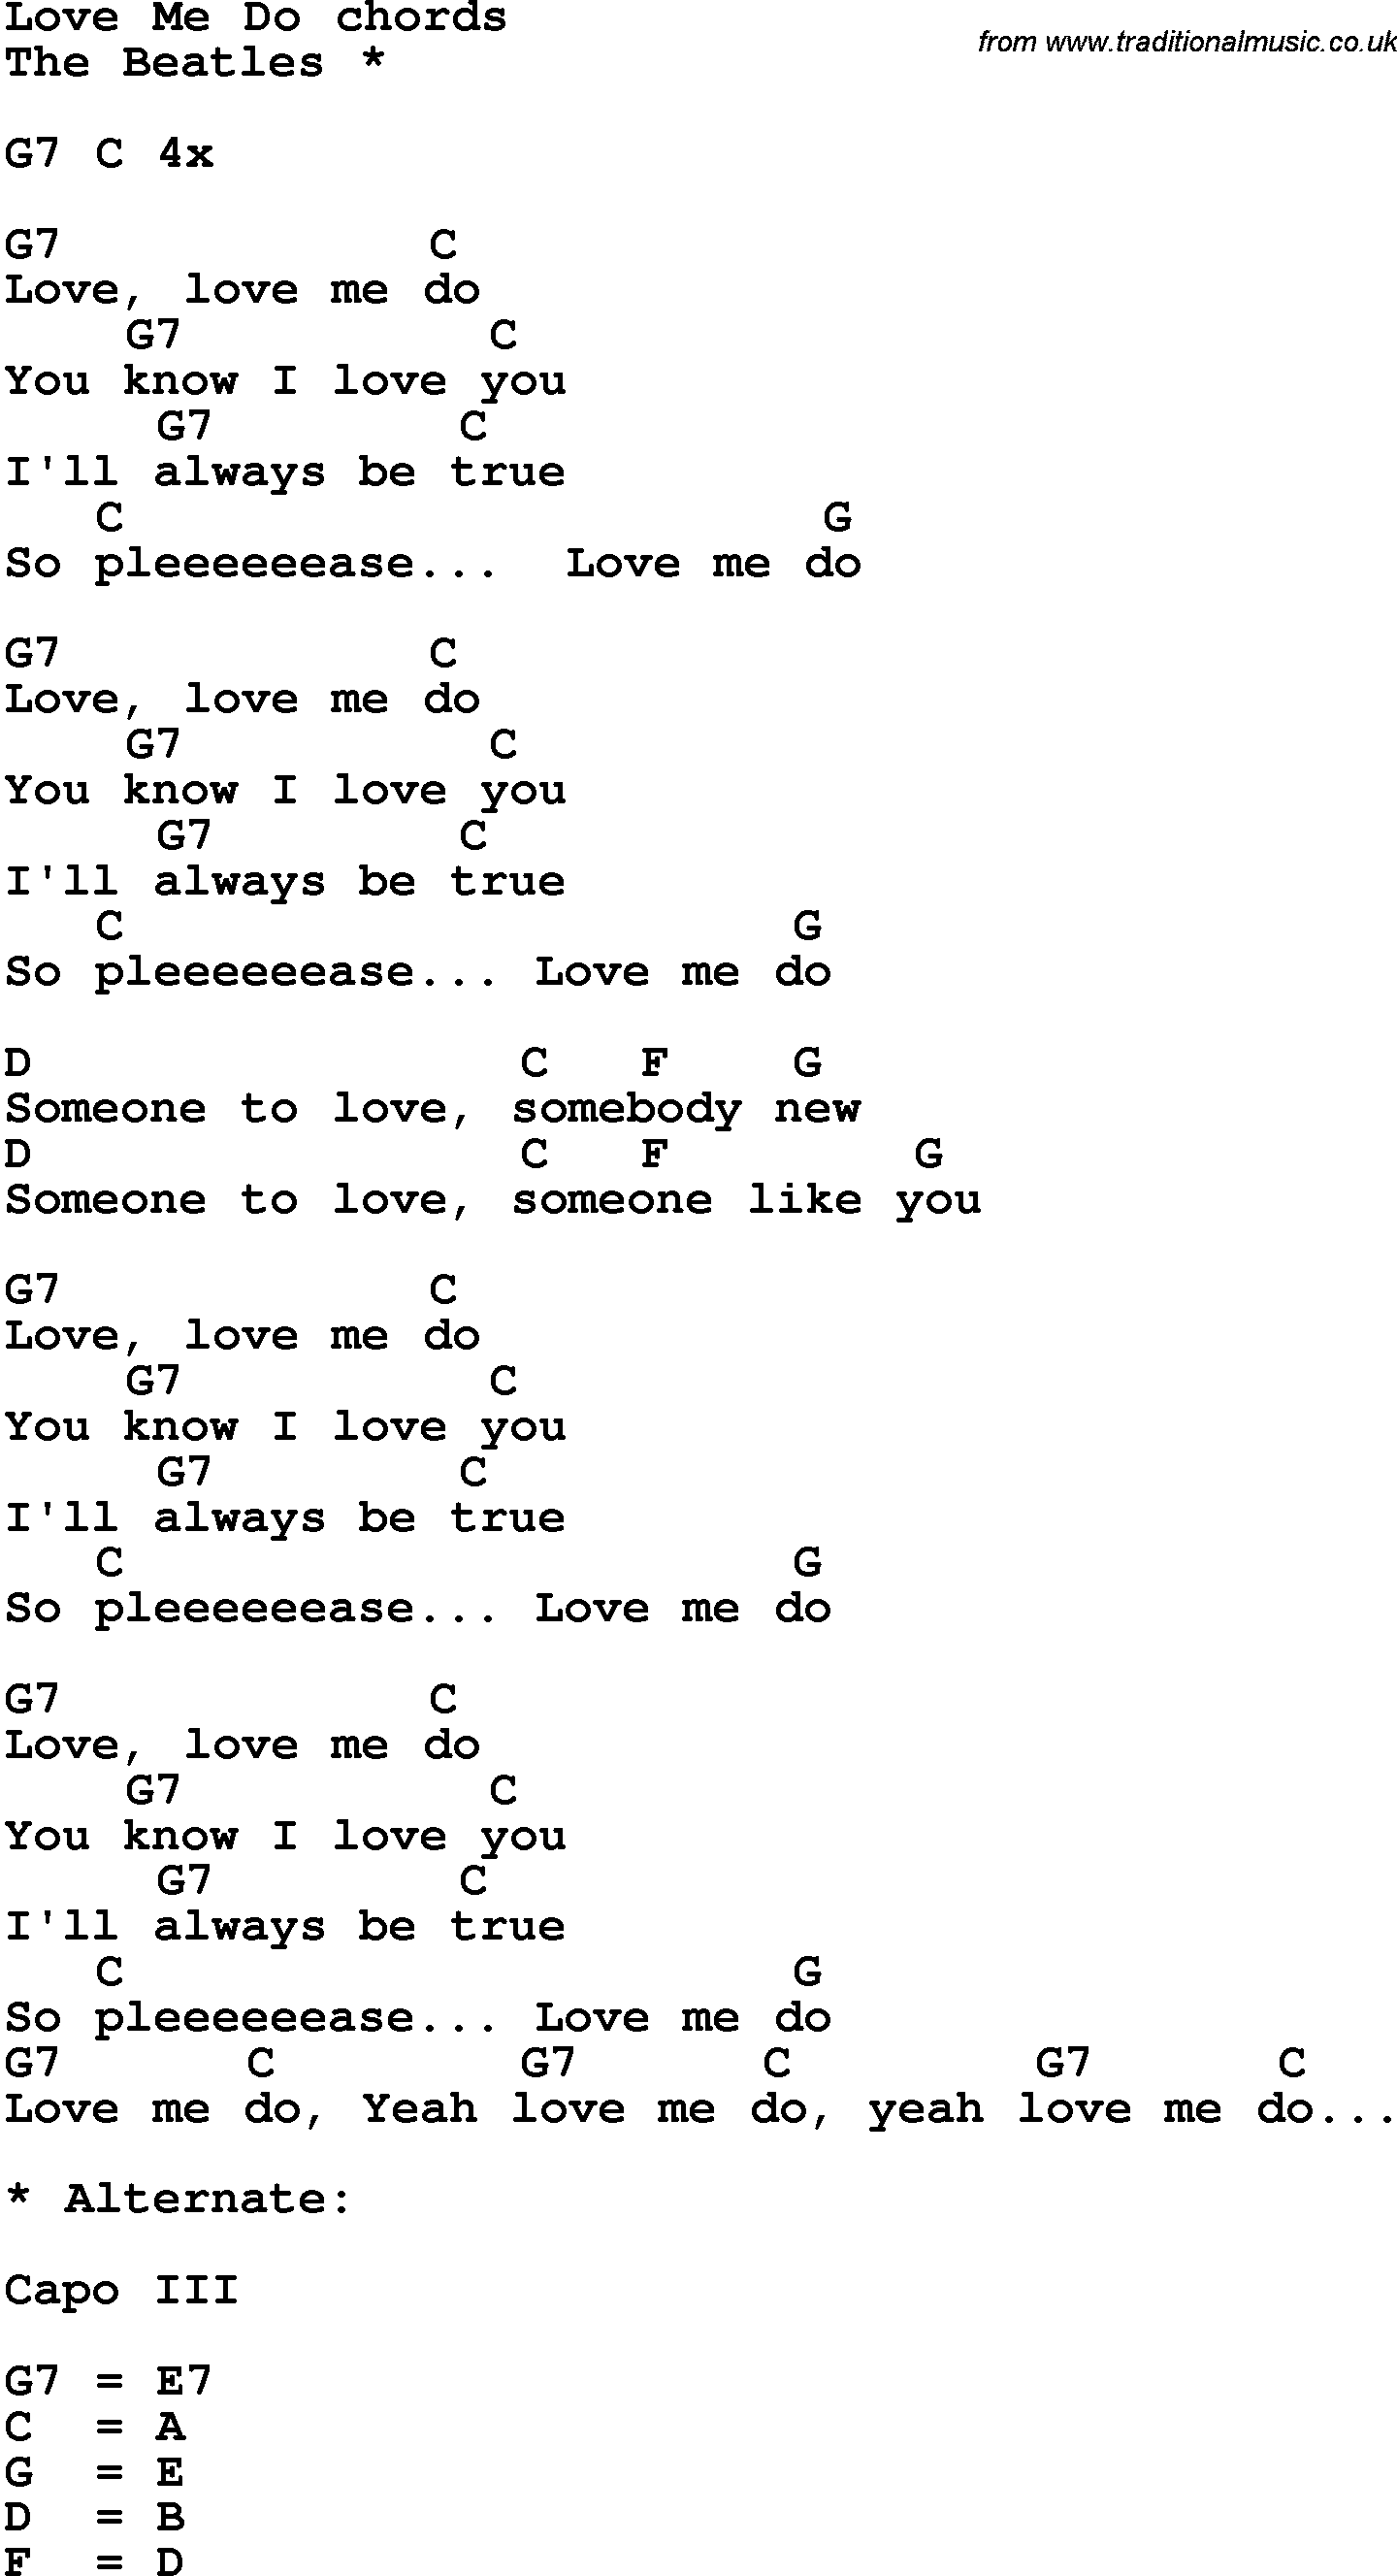 Song Lyrics with guitar chords for Love Me Do - The Beatles